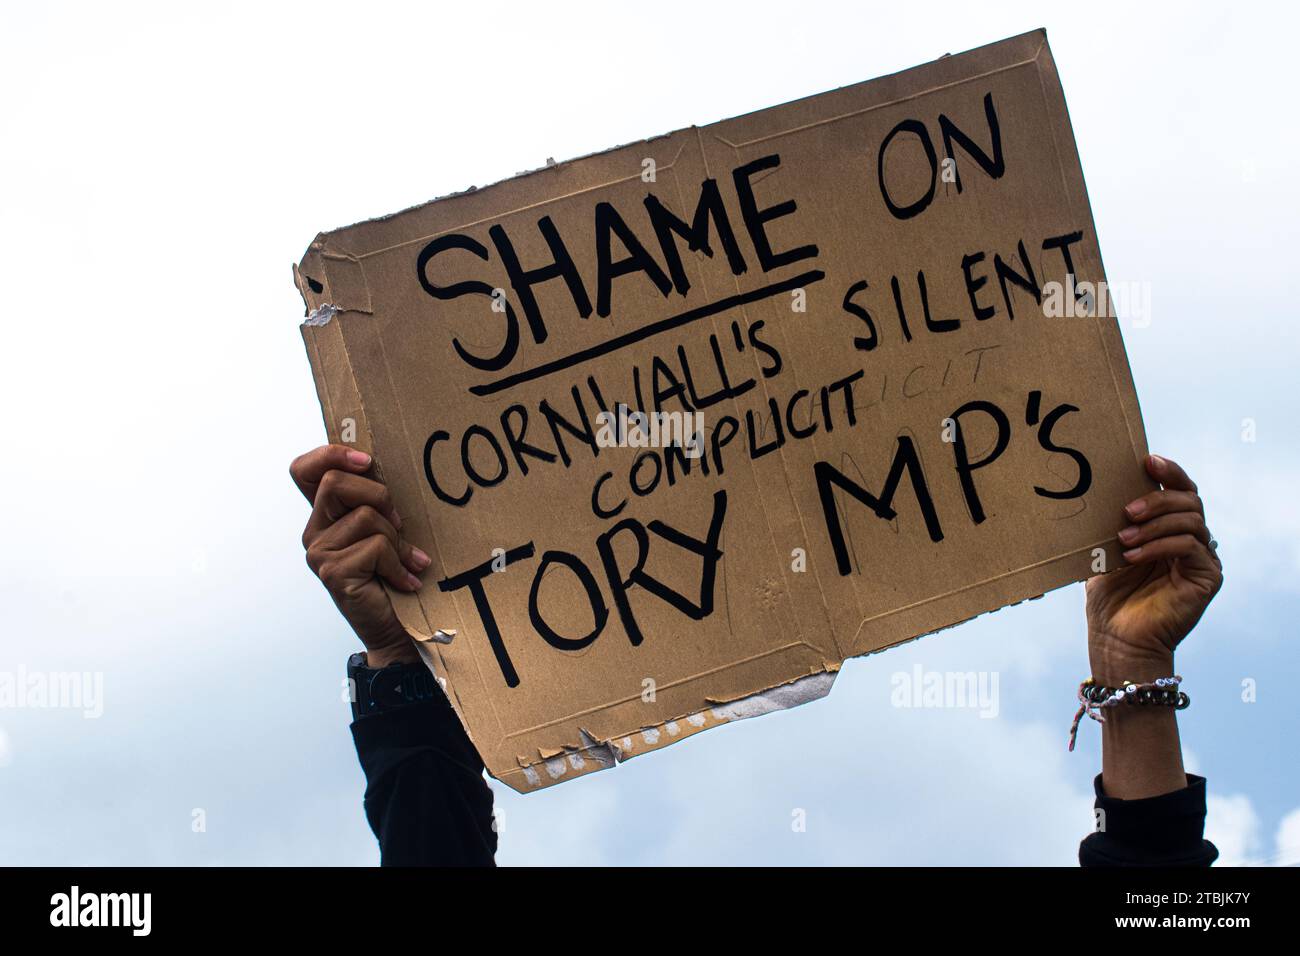 A protest placard referring to the Members of Parliament of Cornwall who are all members of the Conservative party. Stock Photo